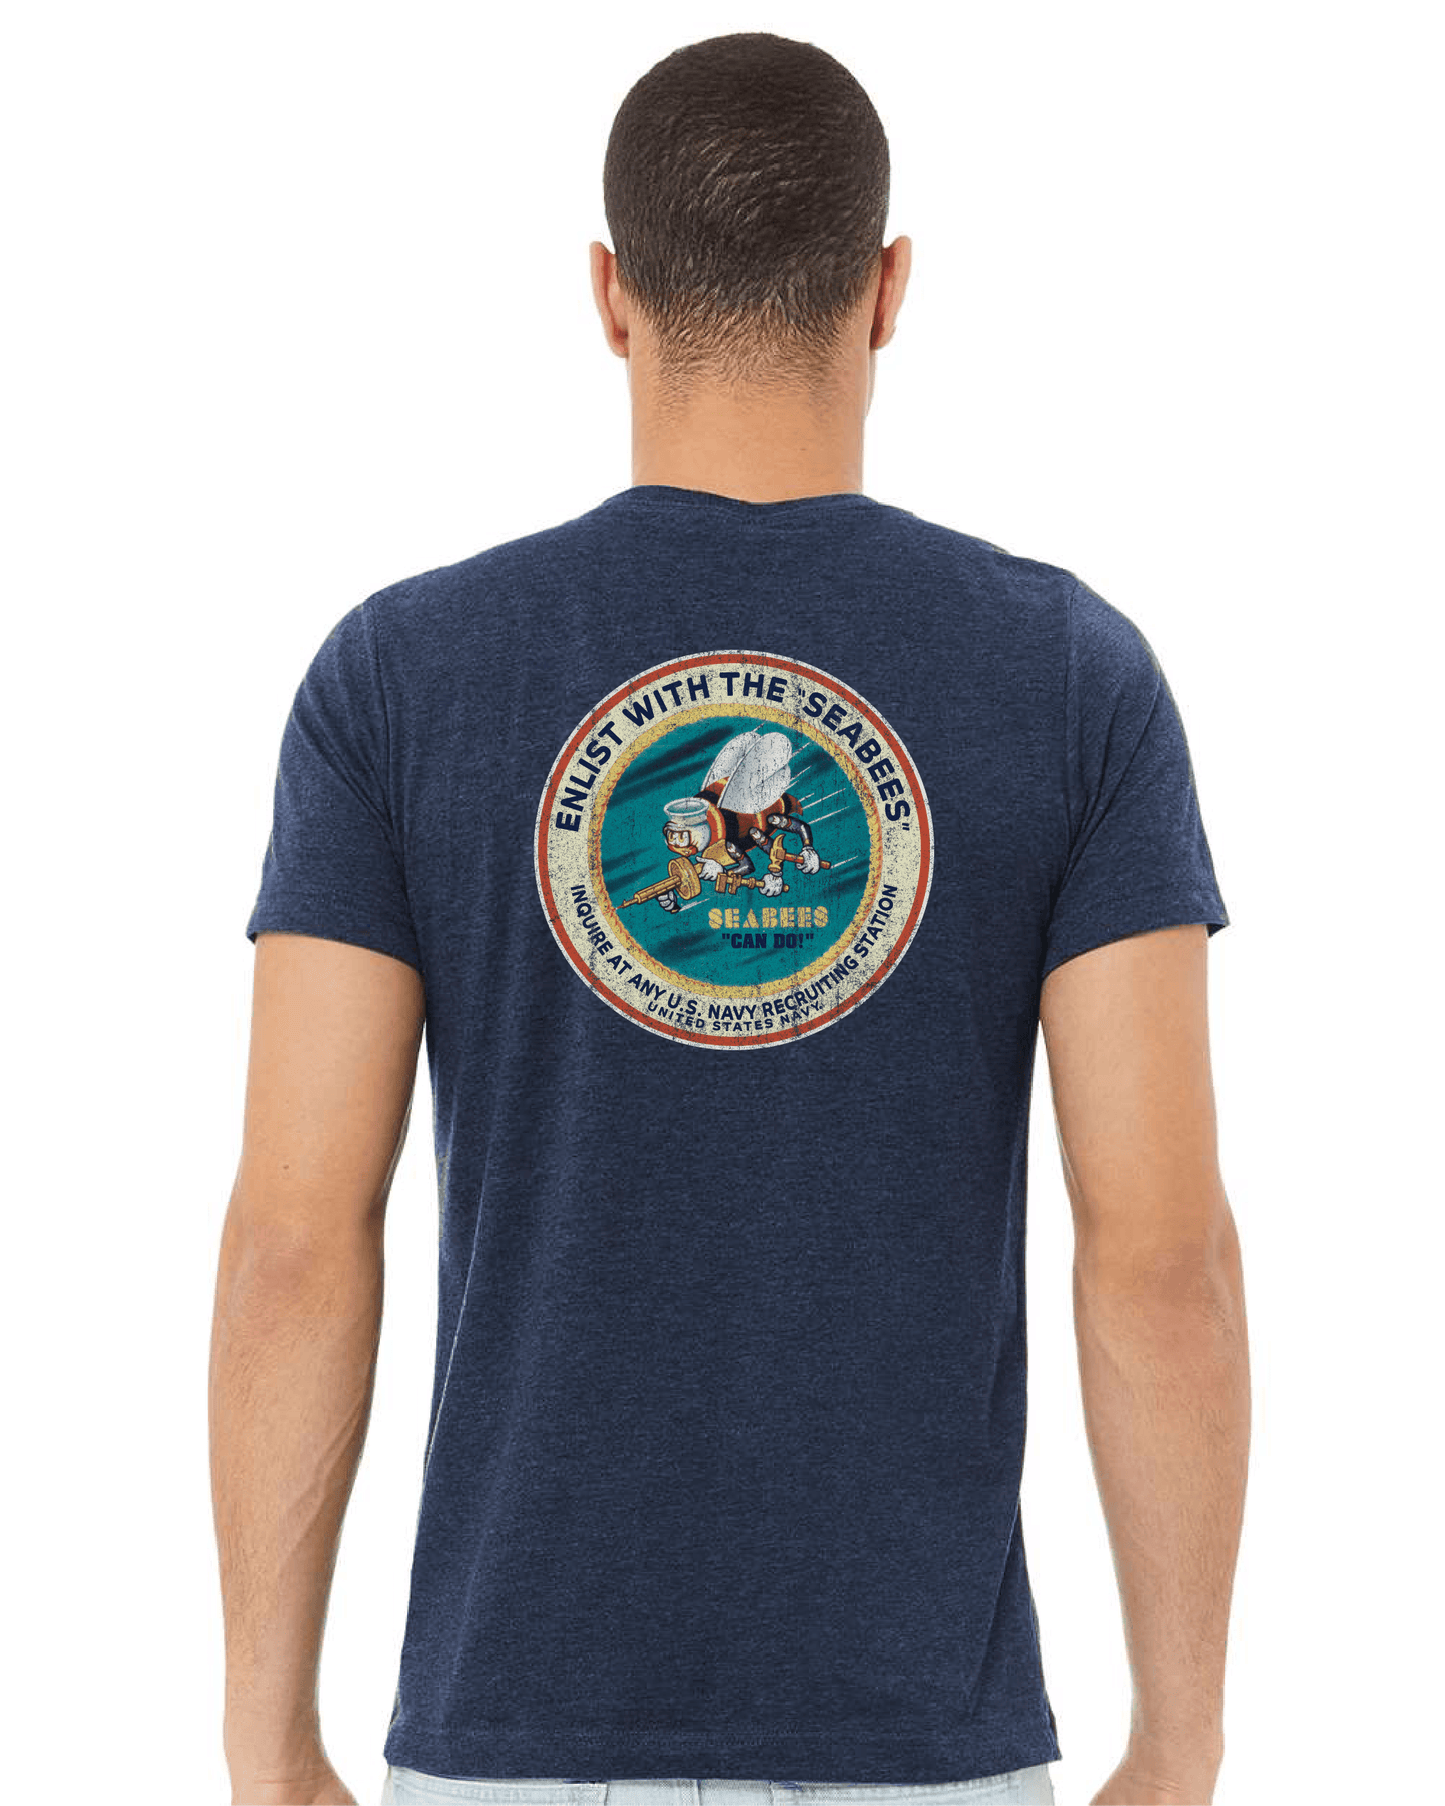 America's Navy Enlist with the SEABEES! Tee